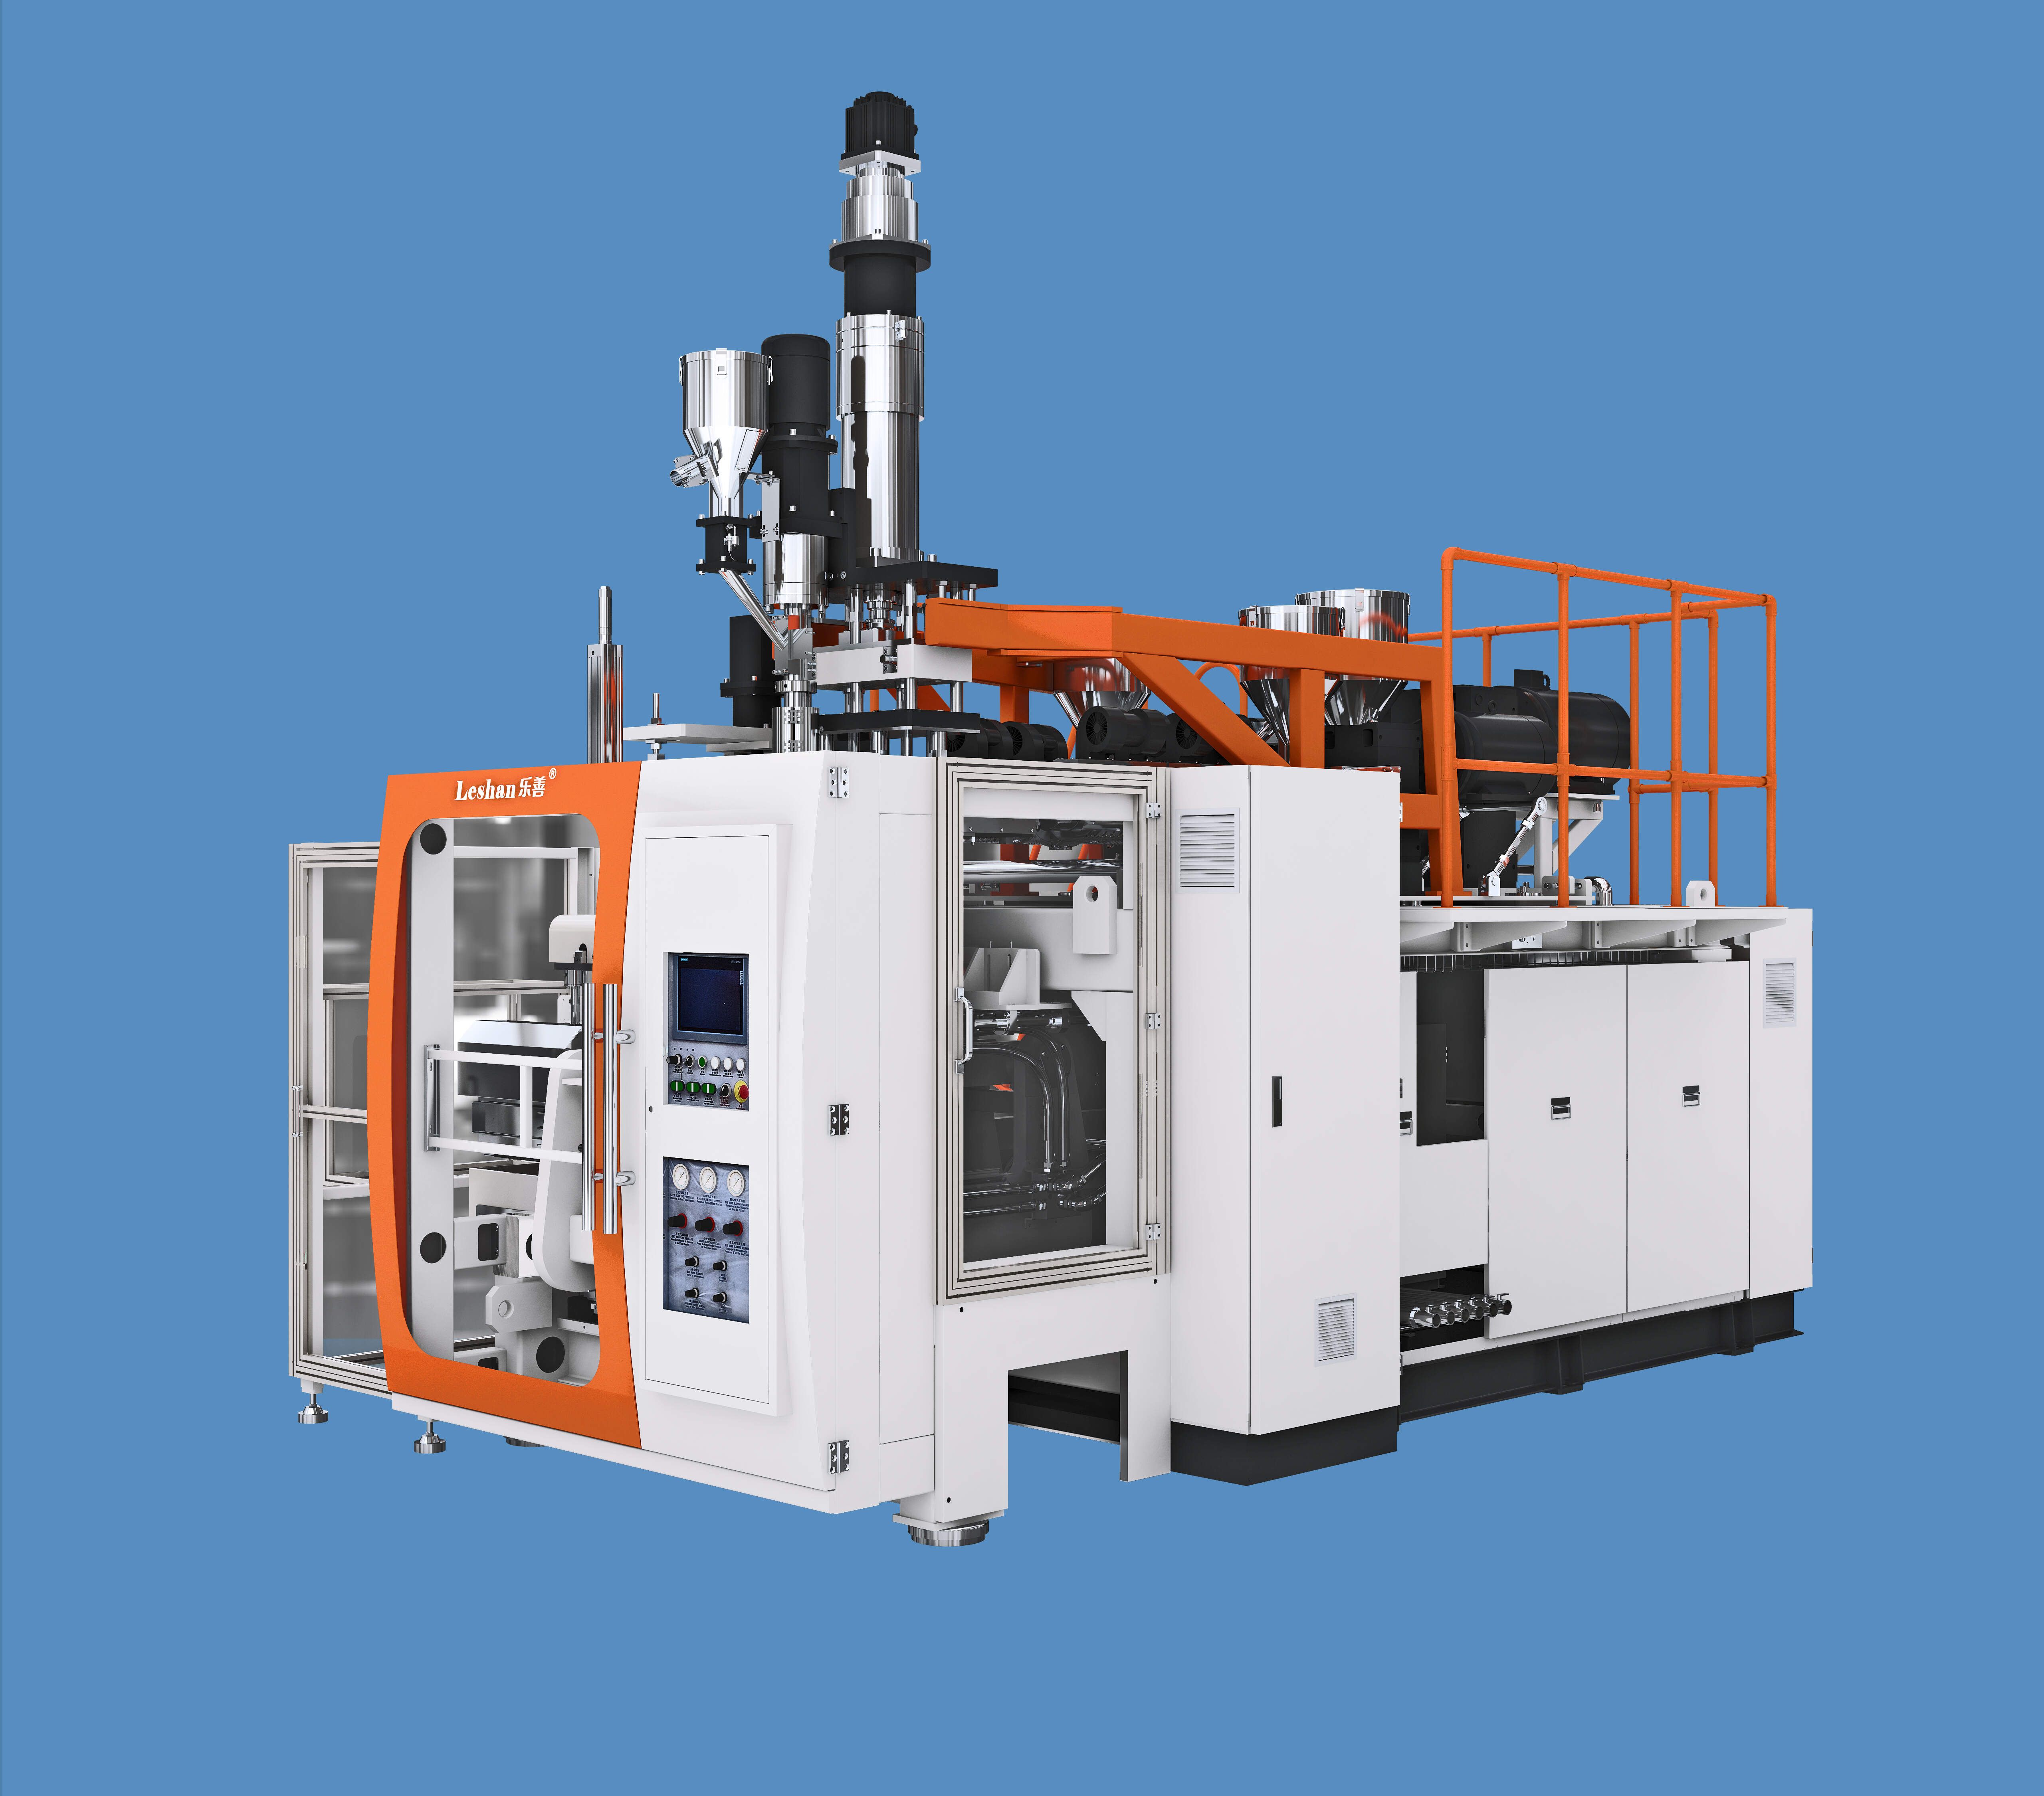 How long does it usually take to troubleshoot automatic blow molding machine?